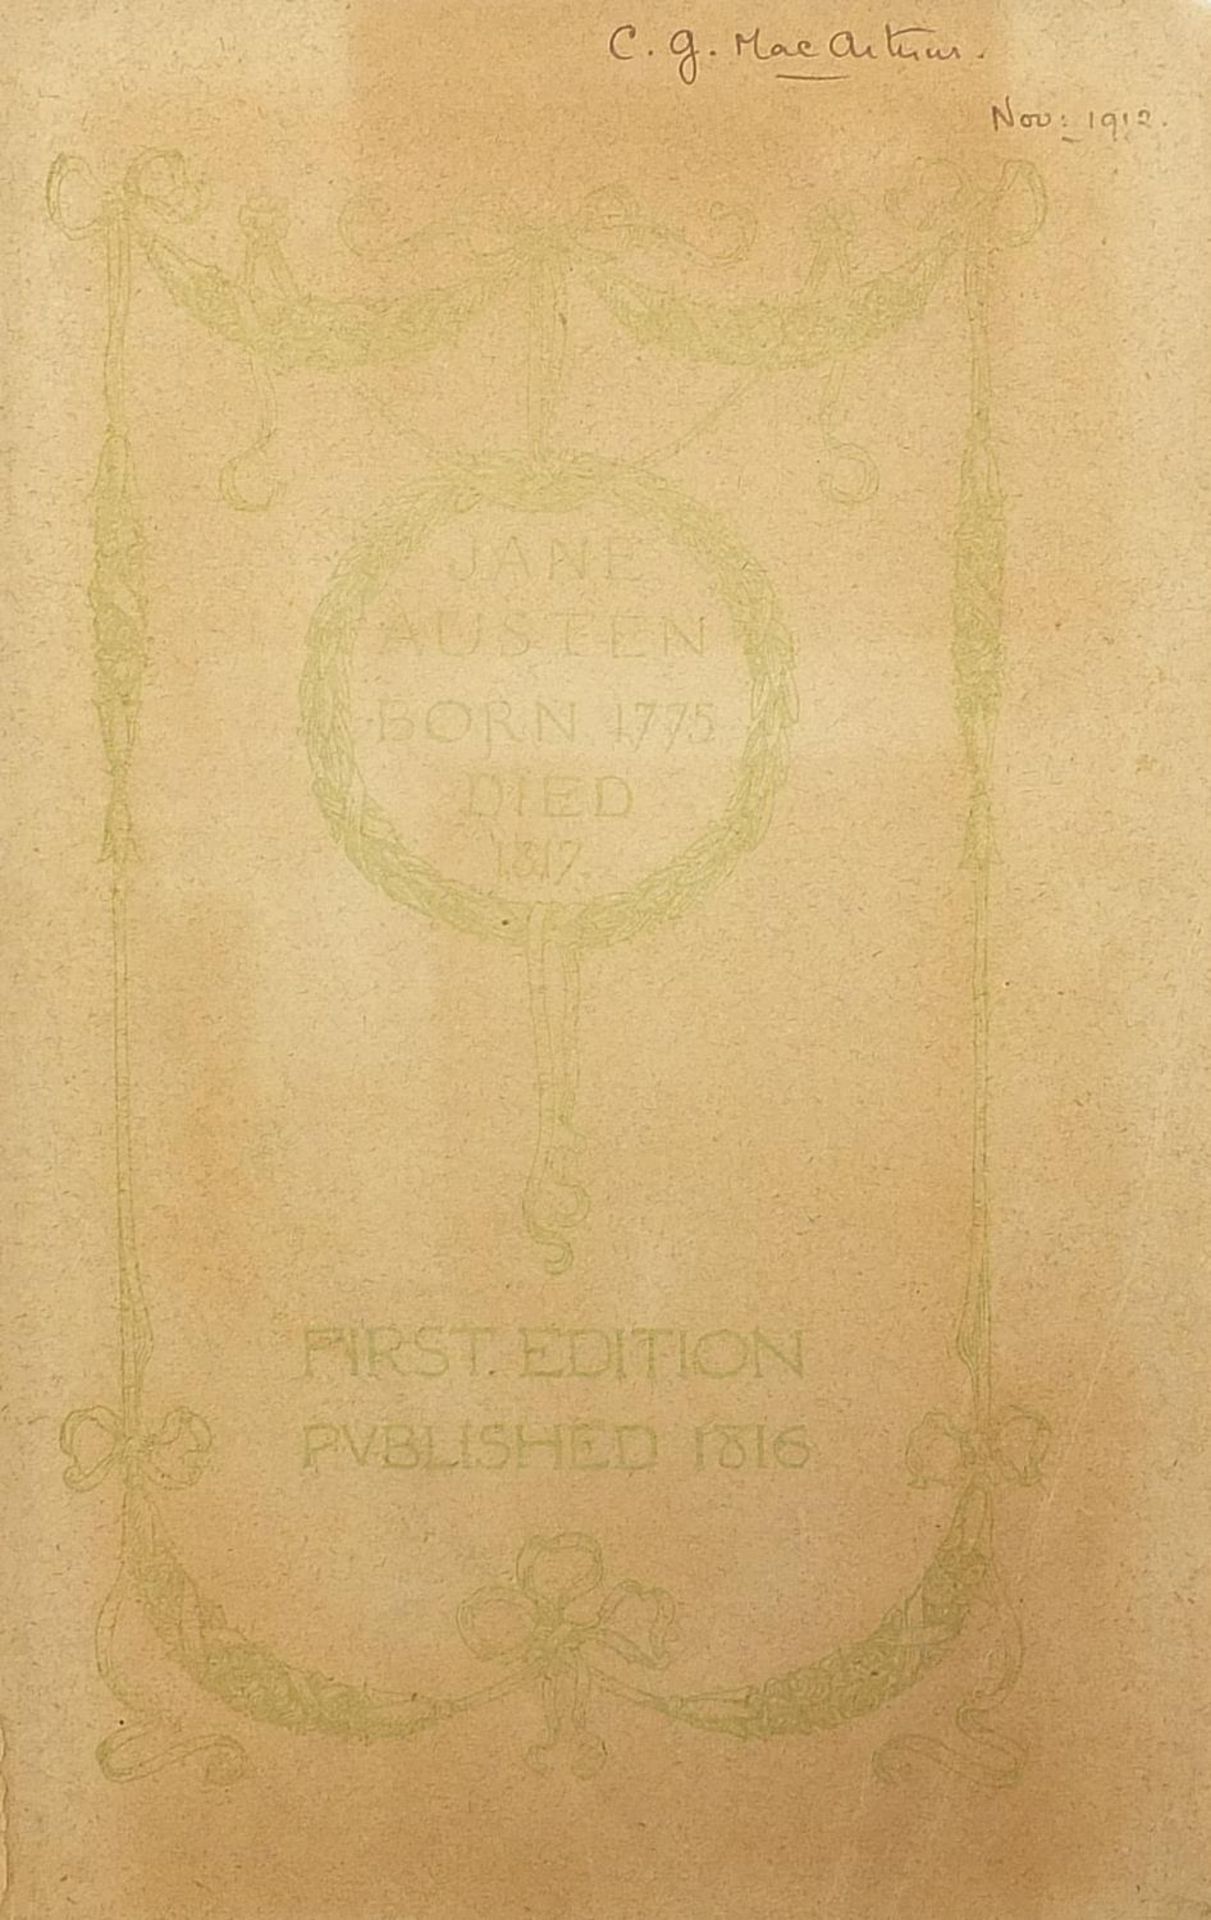 Emma by Jane Austen, hardback book published 1909 : For Further Condition Reports Please Visit Our - Image 2 of 5